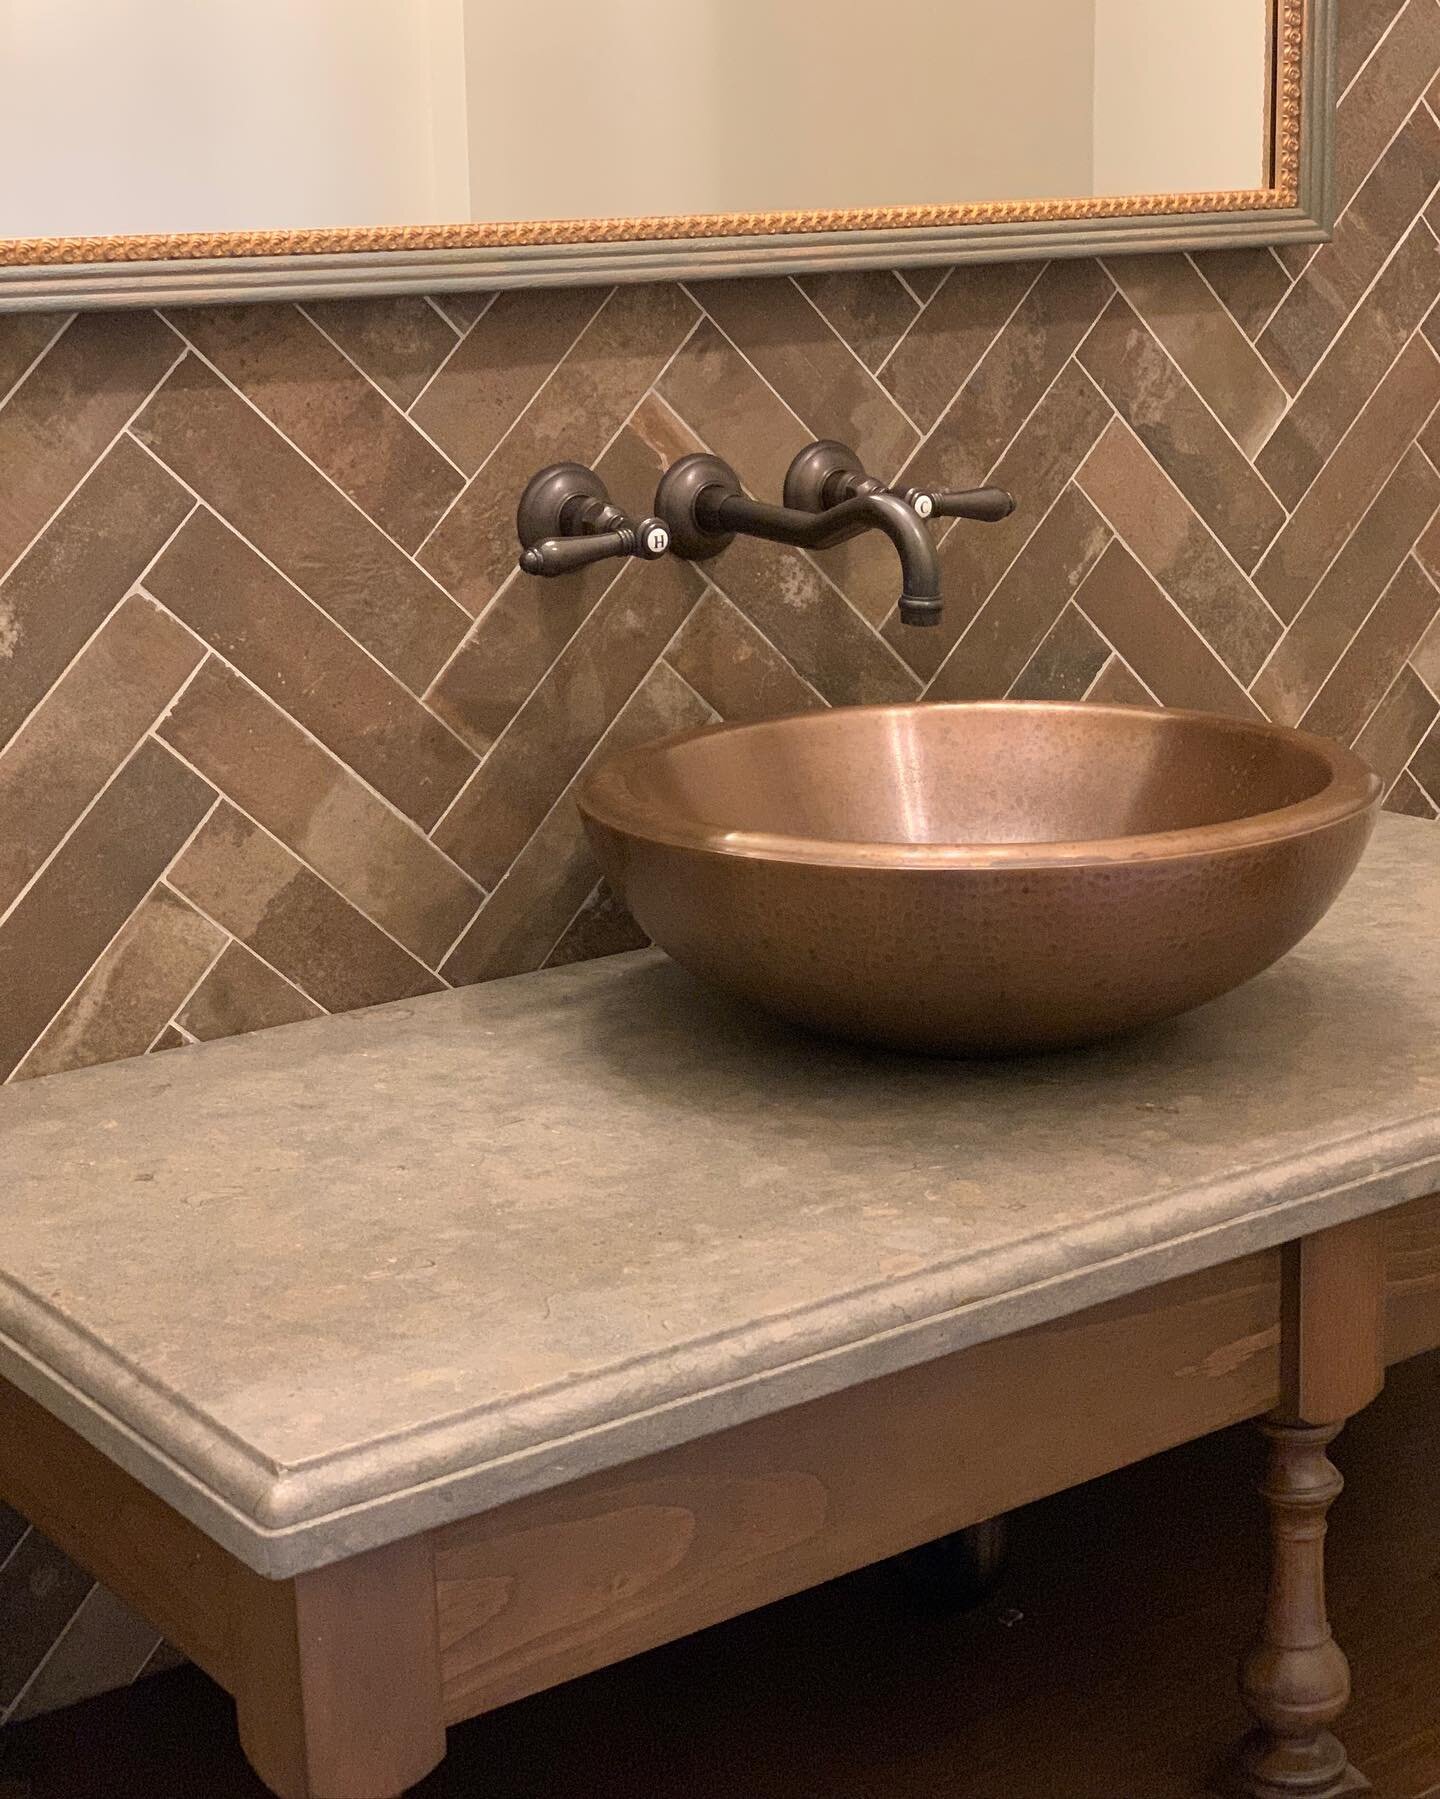 What I love about this Powder Room we designed are the layers of materials and textures. A copper sink sits on a stone counter, grounded by an oak console. Behind the bronze faucet and framed mirror the brick-like tile in the herringbone pattern prov